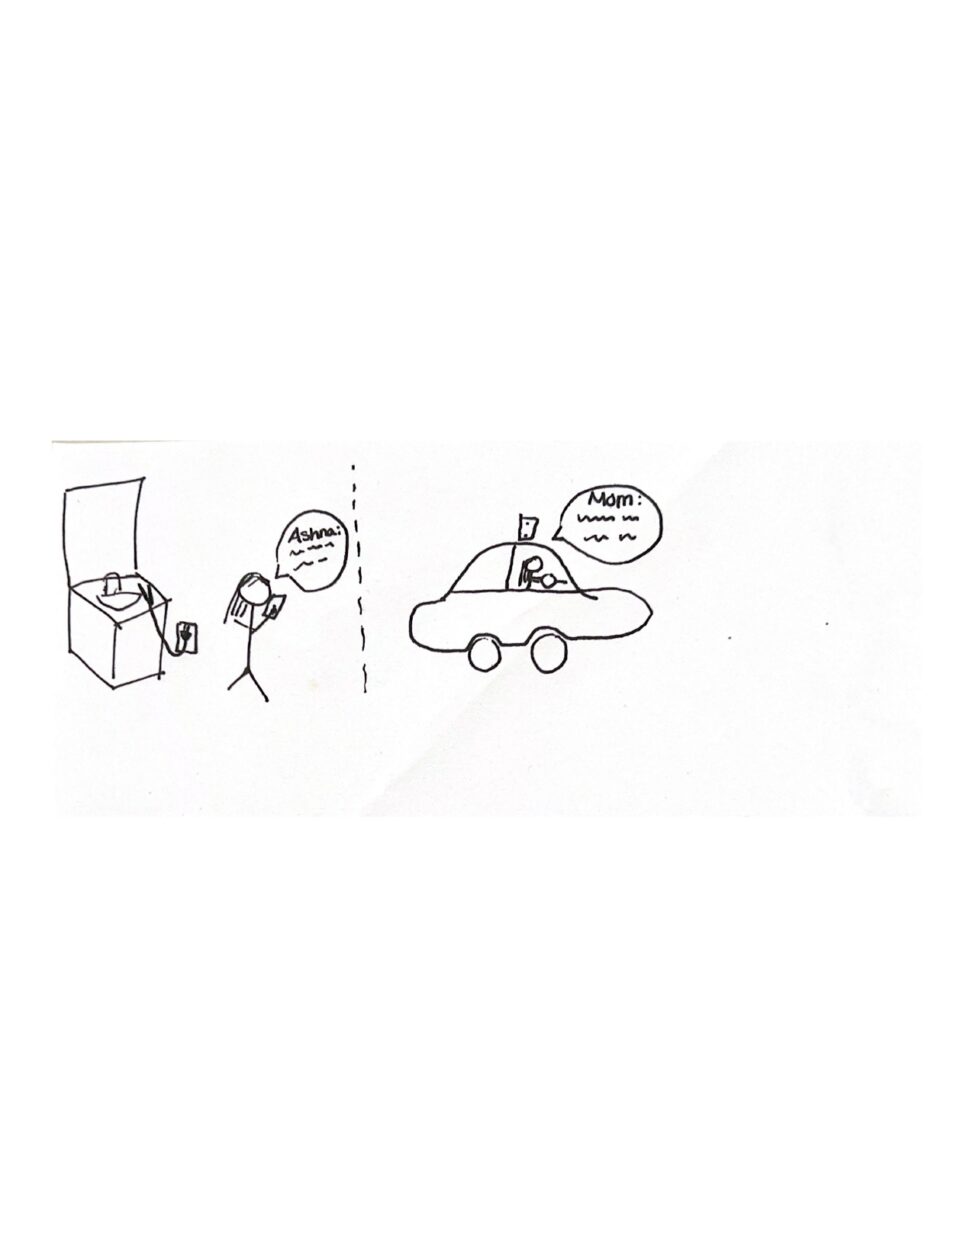 The stick figure, me, in the car is on the phone with my mom. On the other side there is my mom standing in the washroom on the phone with me. In the washroom there is a plugged hair straightner